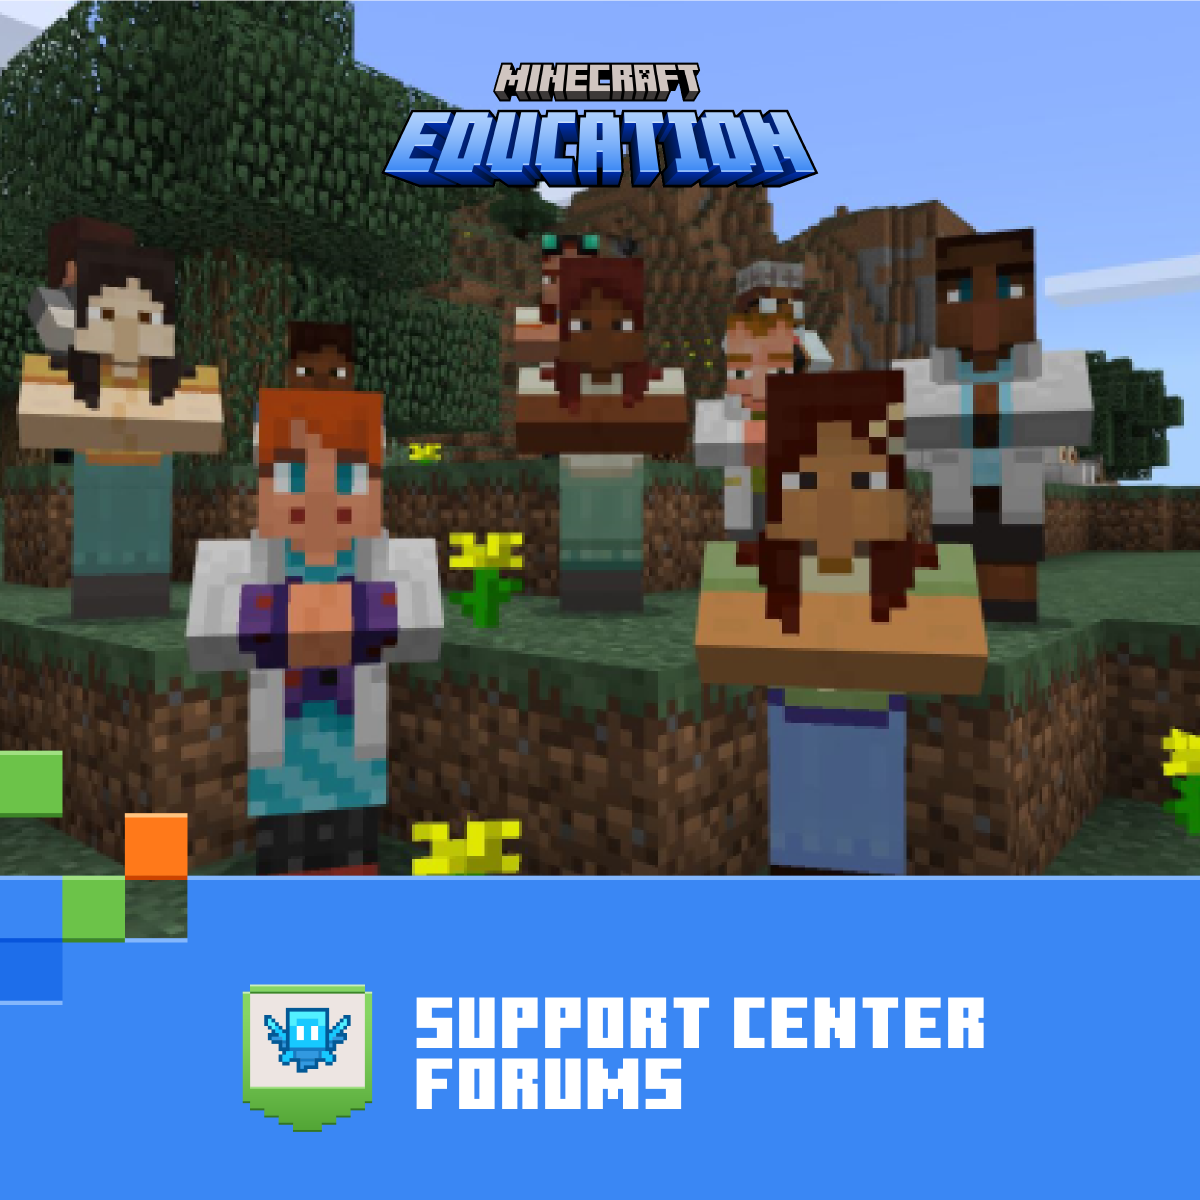 🤔 Got an idea for improving Minecraft Education? 🆘 Looking for Tech Support? 🐞 Found a bug we can fix? 👋🏽 Just want to say hi? Visit the #MinecraftEdu Support Forums and connect directly with our support team! msft.it/6016cQtGA